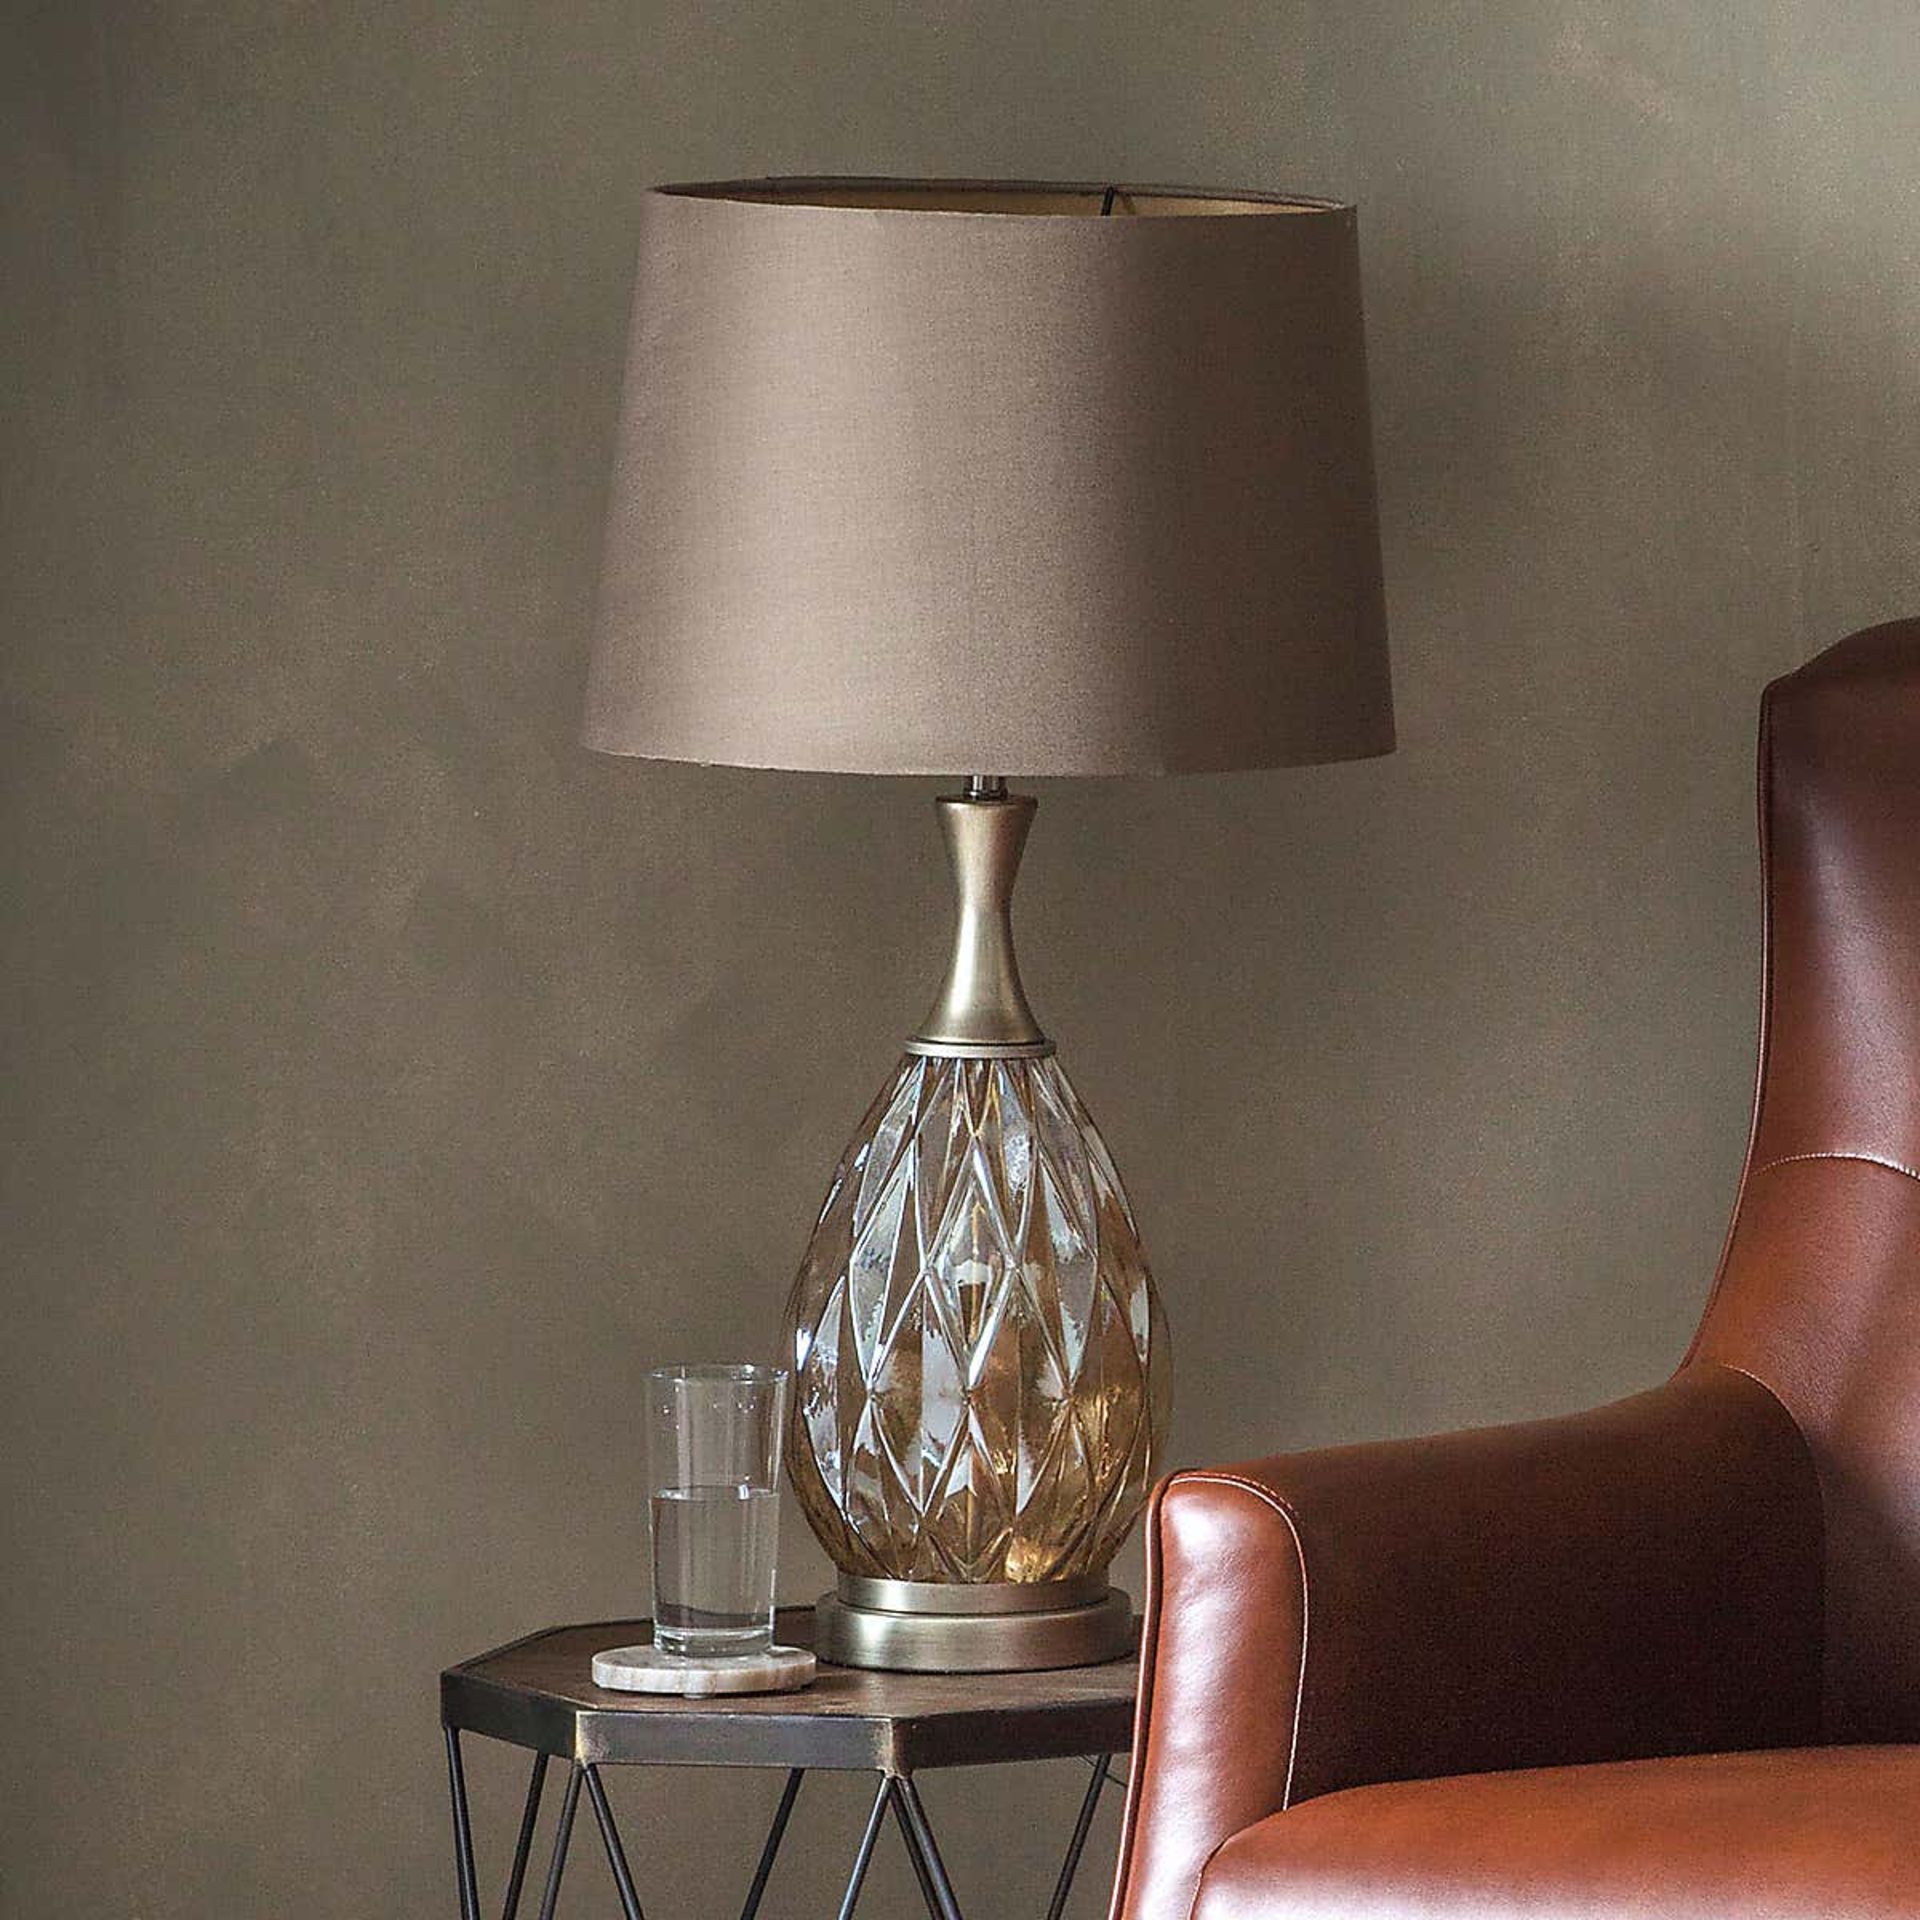 Clarence Table Lamp Classic Geometric Tinted Glass Table Lamp With Metal Detailing In A Champagne